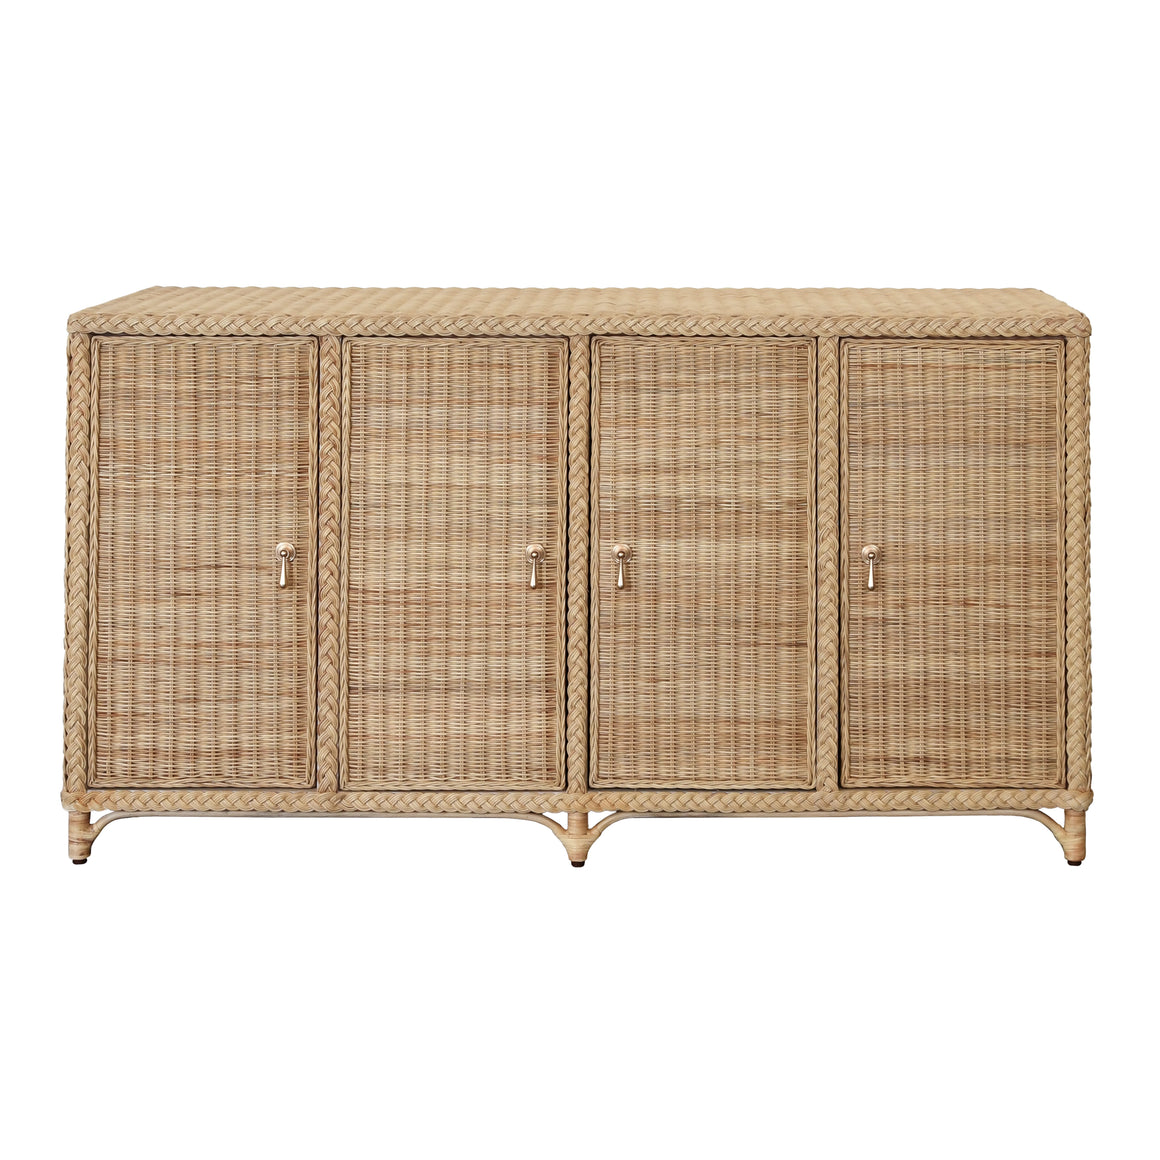 Evander Four Door Buffet in Fully Wrapped Rattan with Satin Brass Pulls